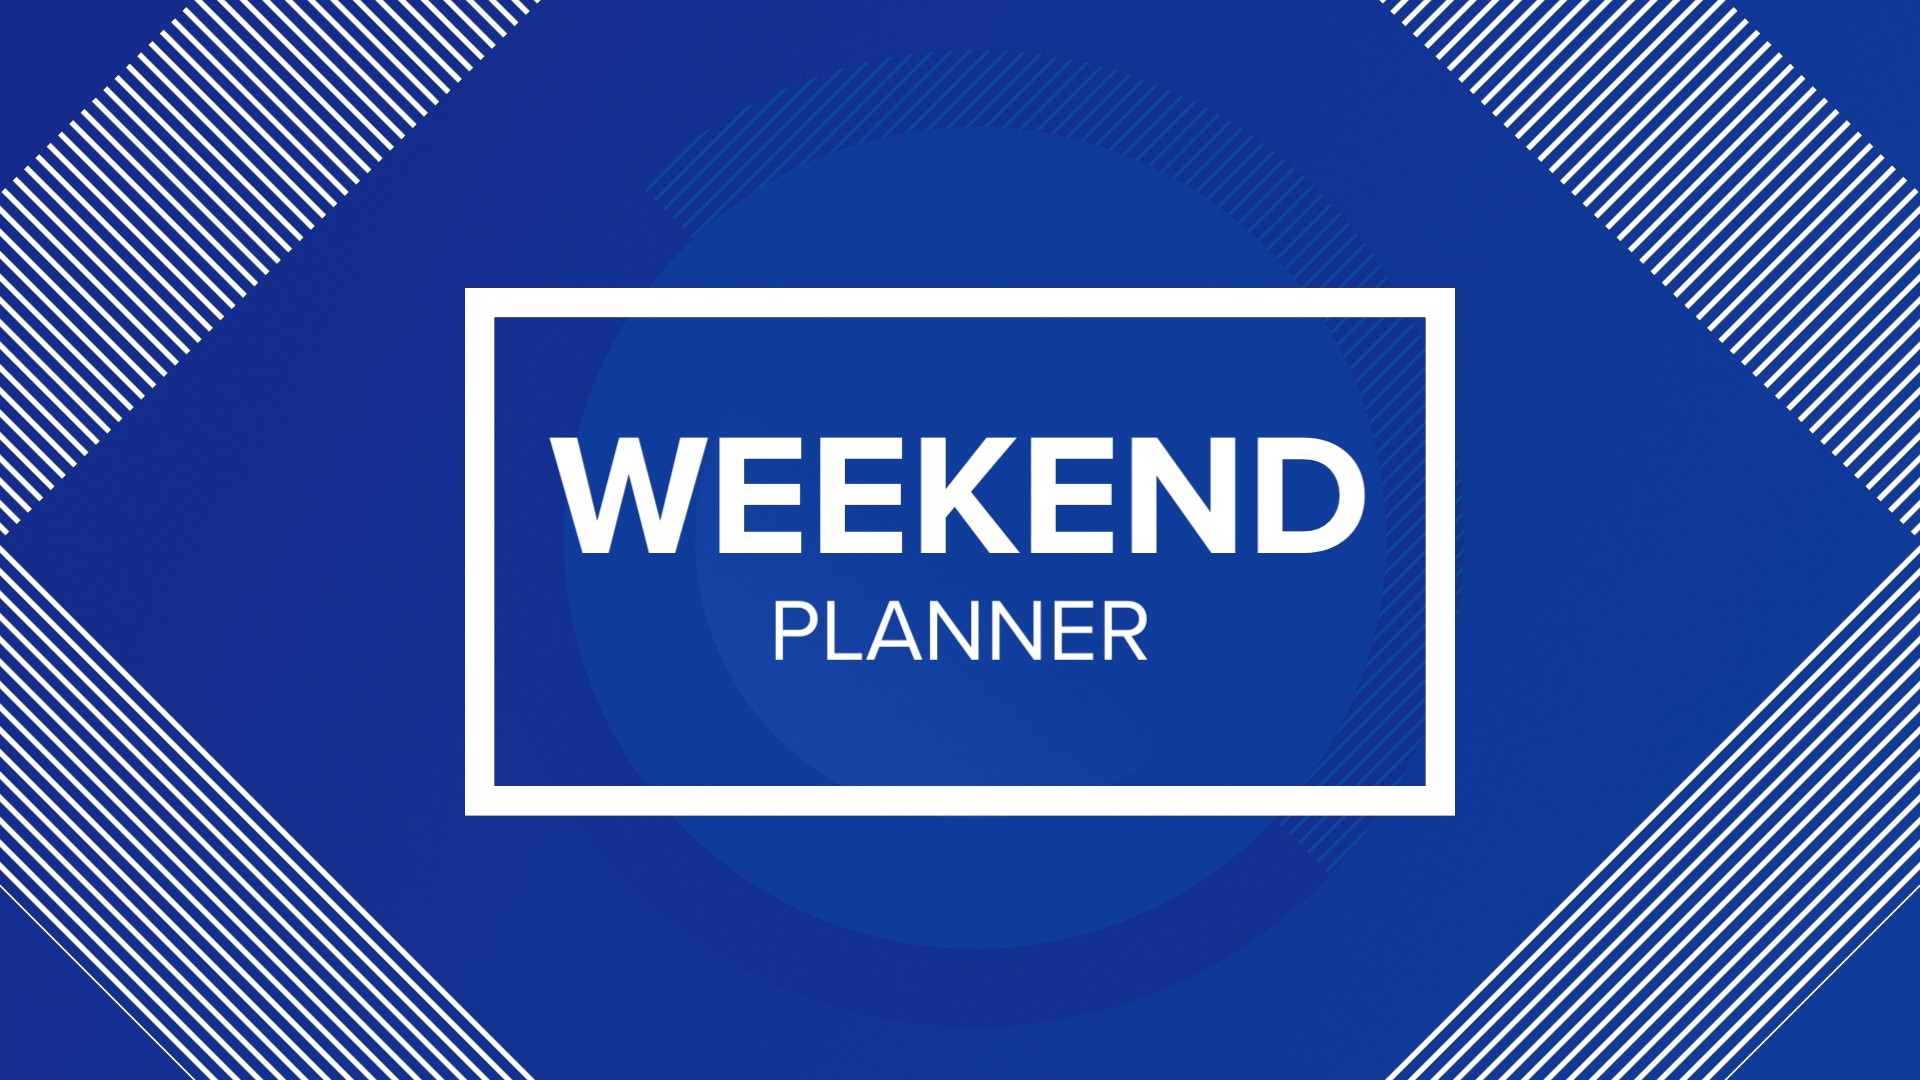 This weekend's planner is filled with thrilling events throughout East Texas.